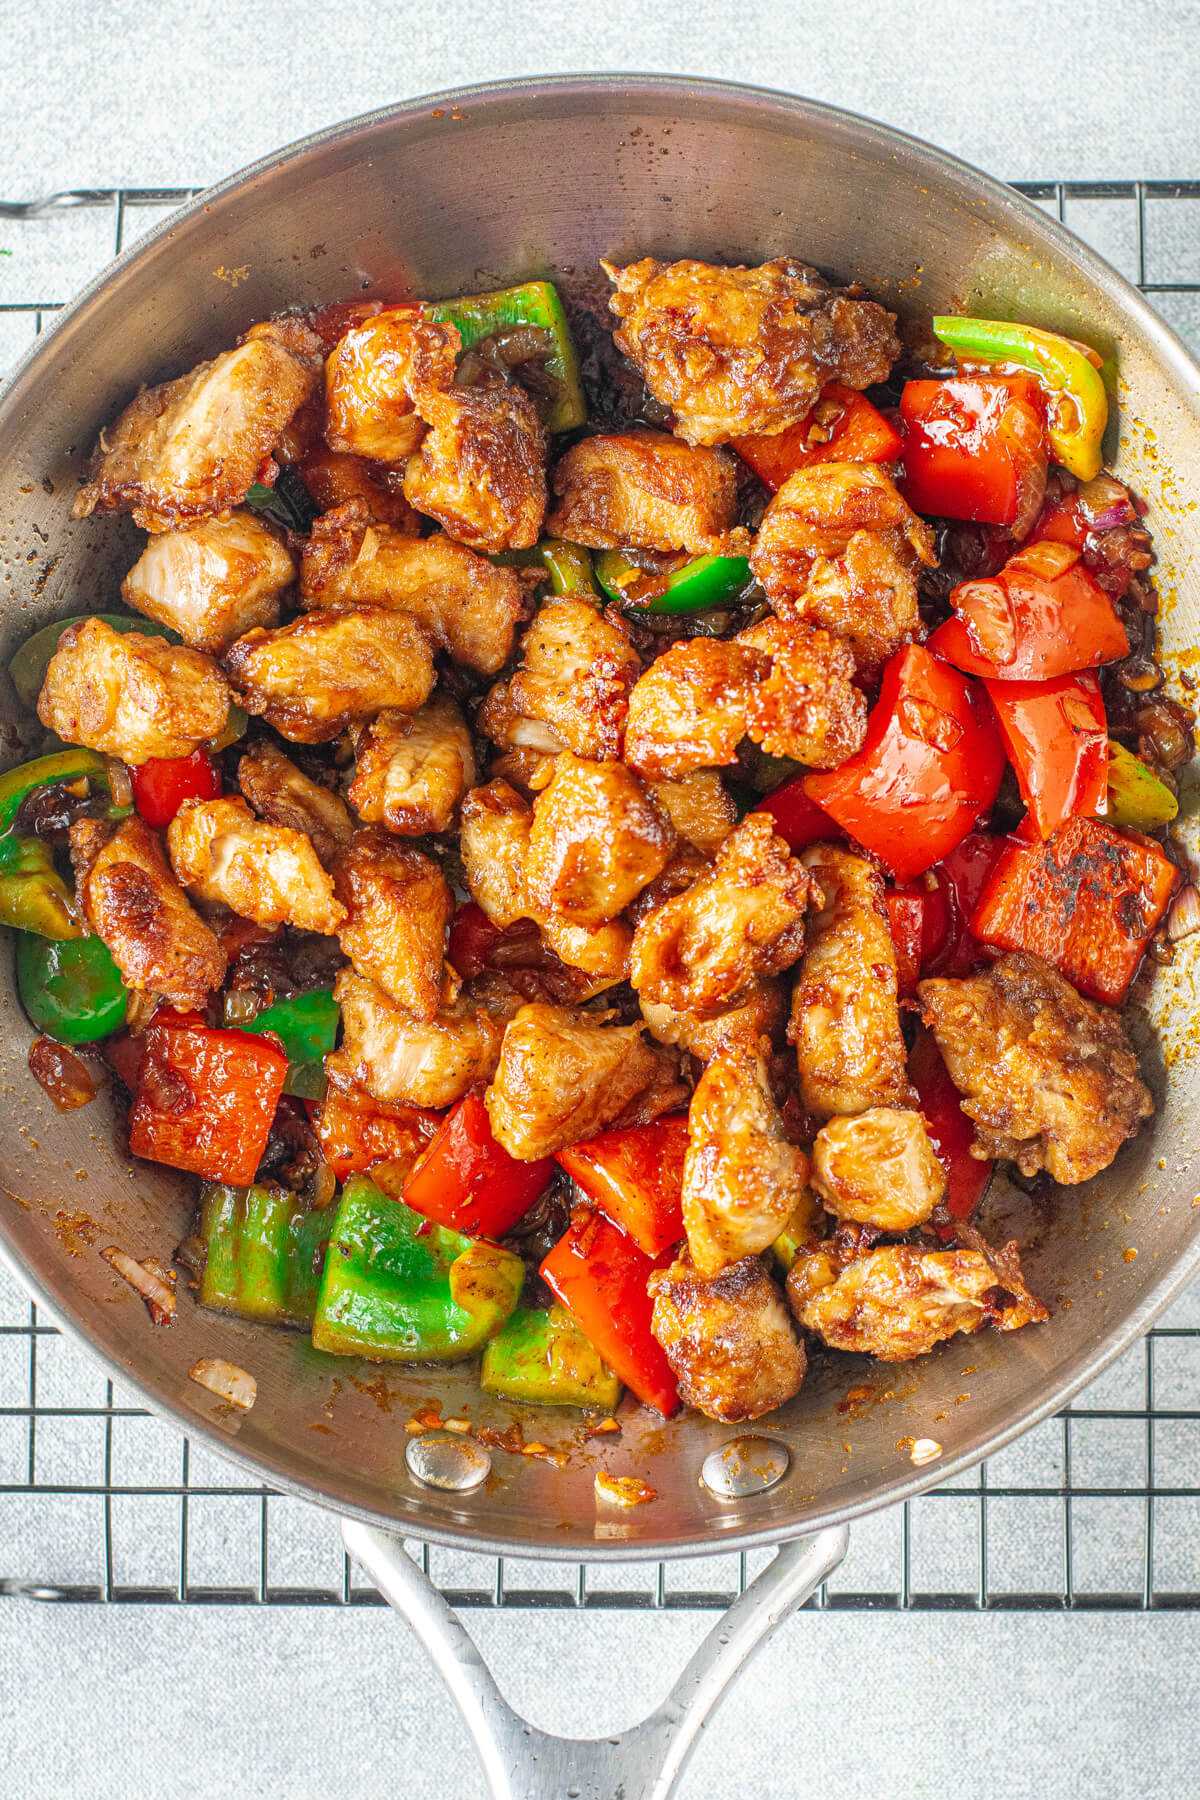 Stir fried chicken and vegetables in a frying pan.